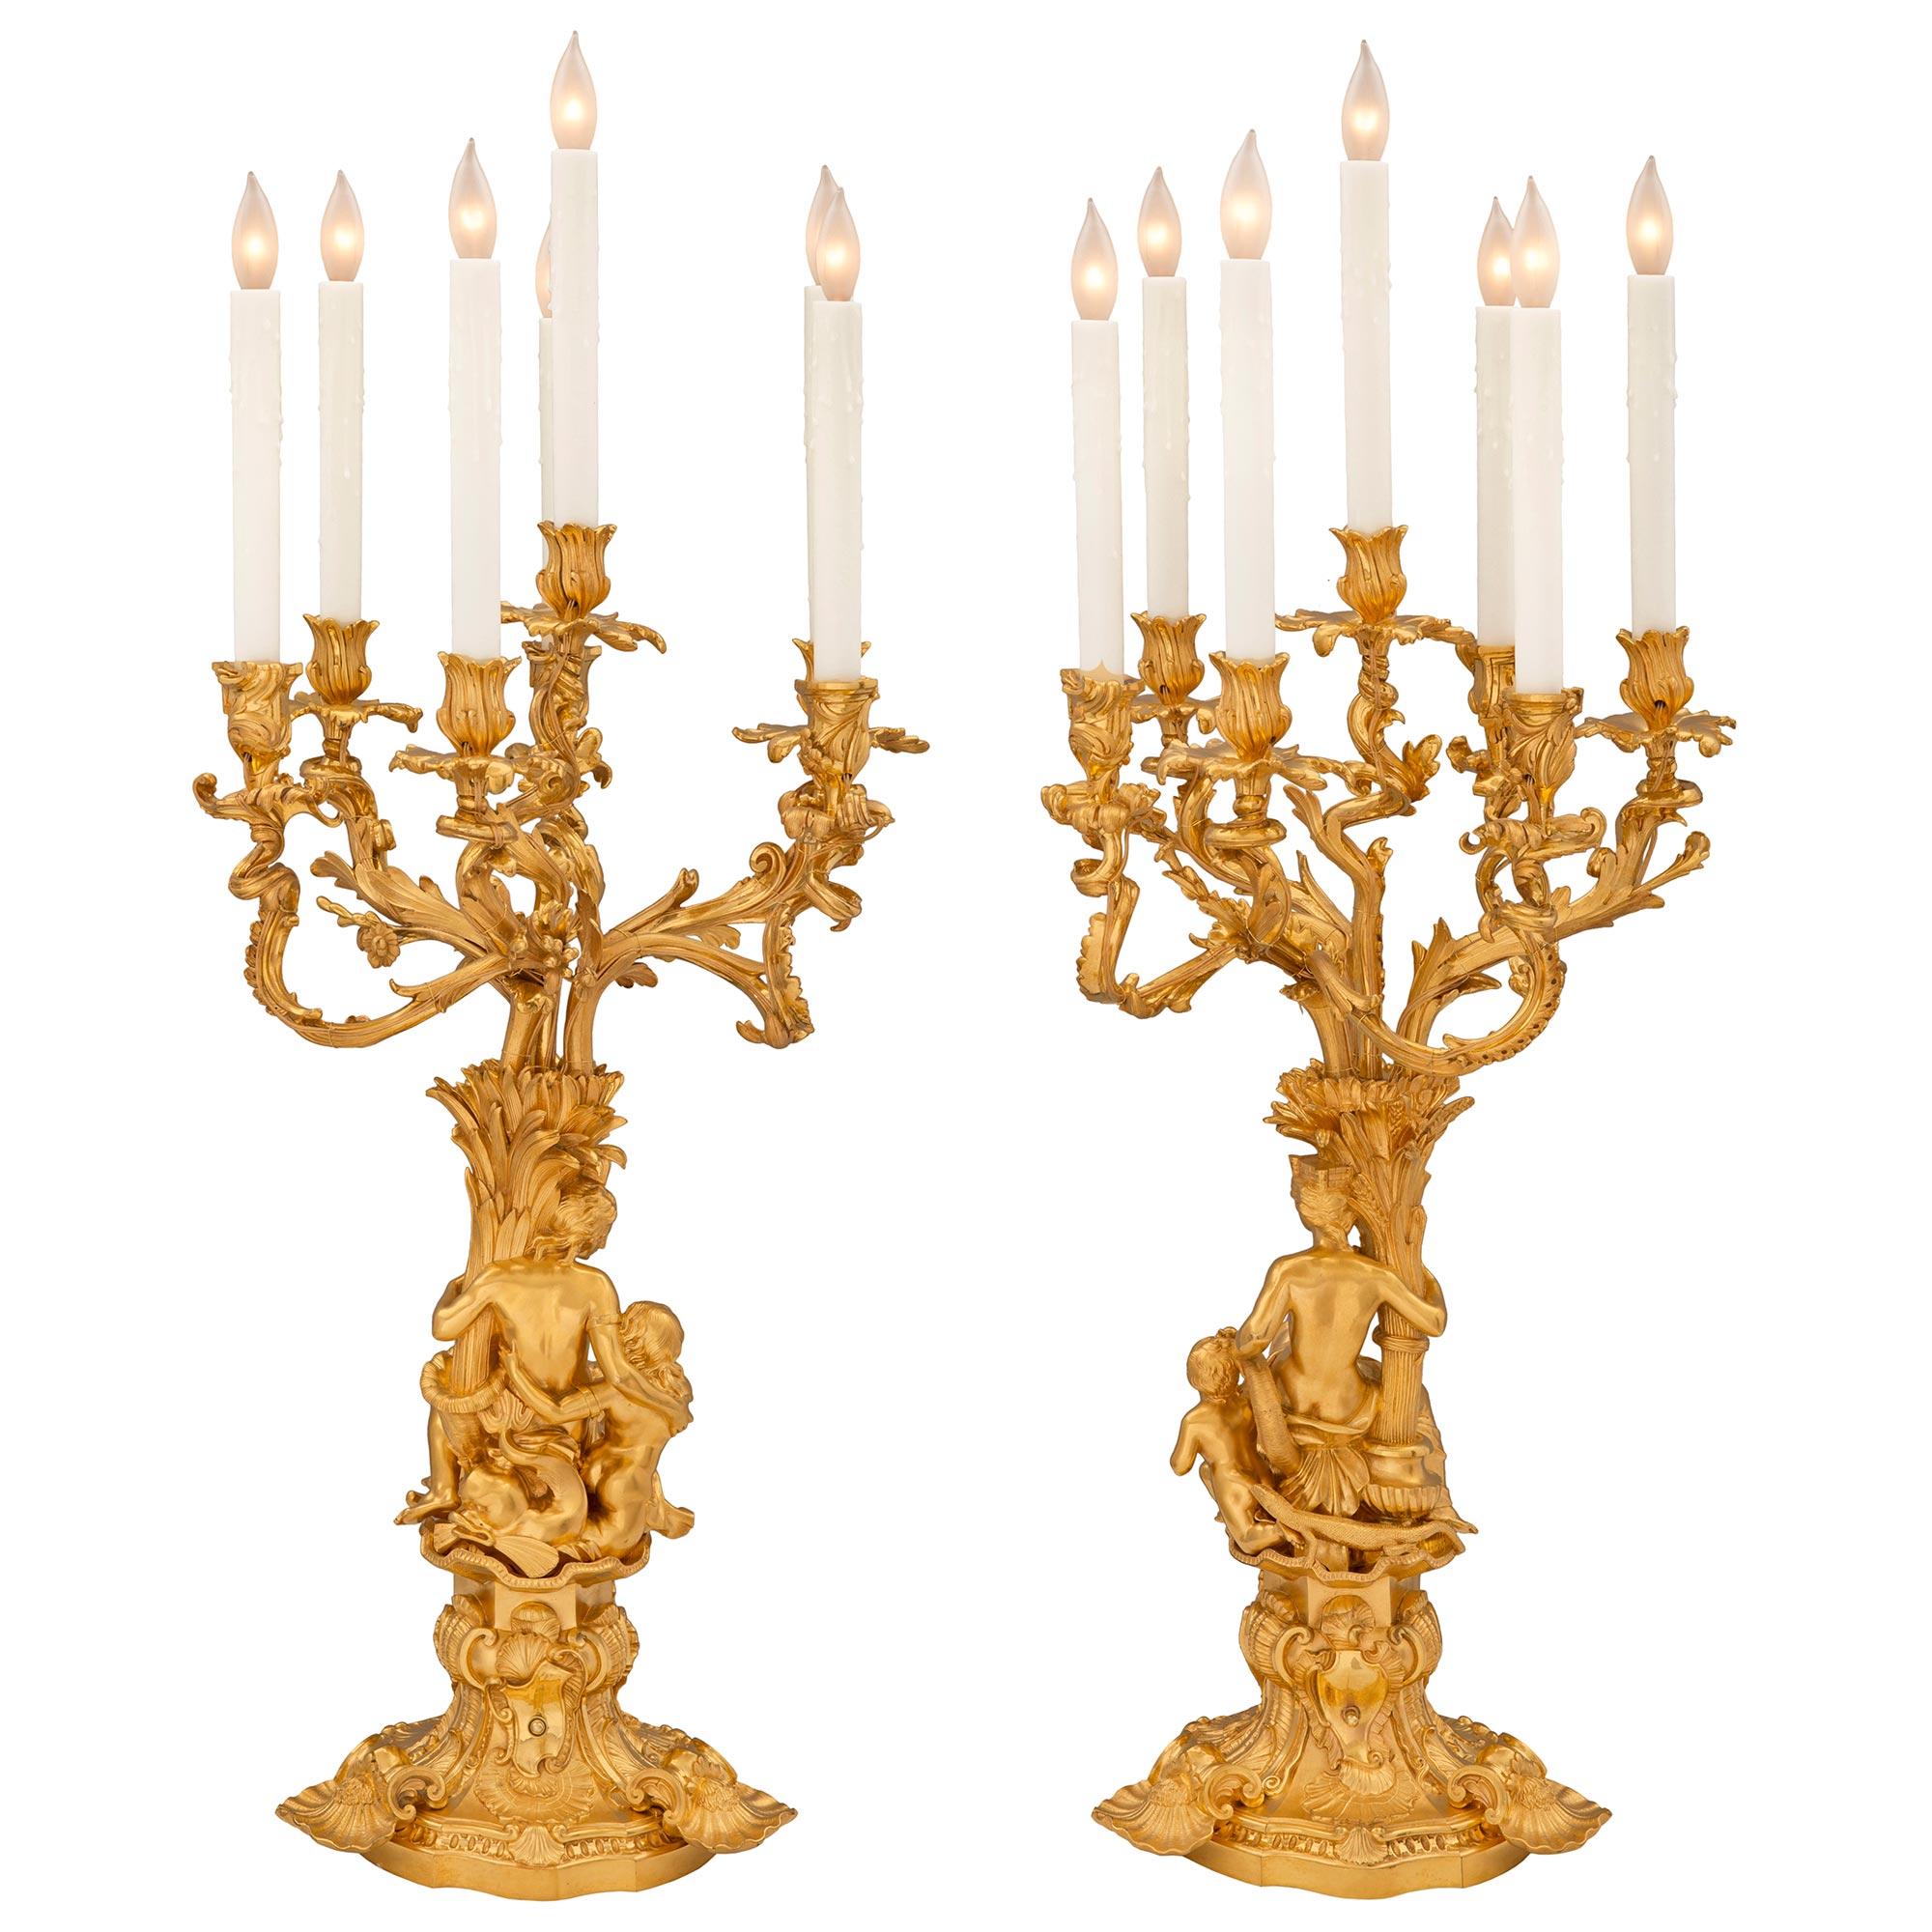 A stunning and extremely high quality true pair of large scale French 19th century Louis XV st. ormolu candelabra lamps. Each seven arm candelabra is raised by a beautiful wonderfully executed scalloped shaped base with a fine fluted mottled border